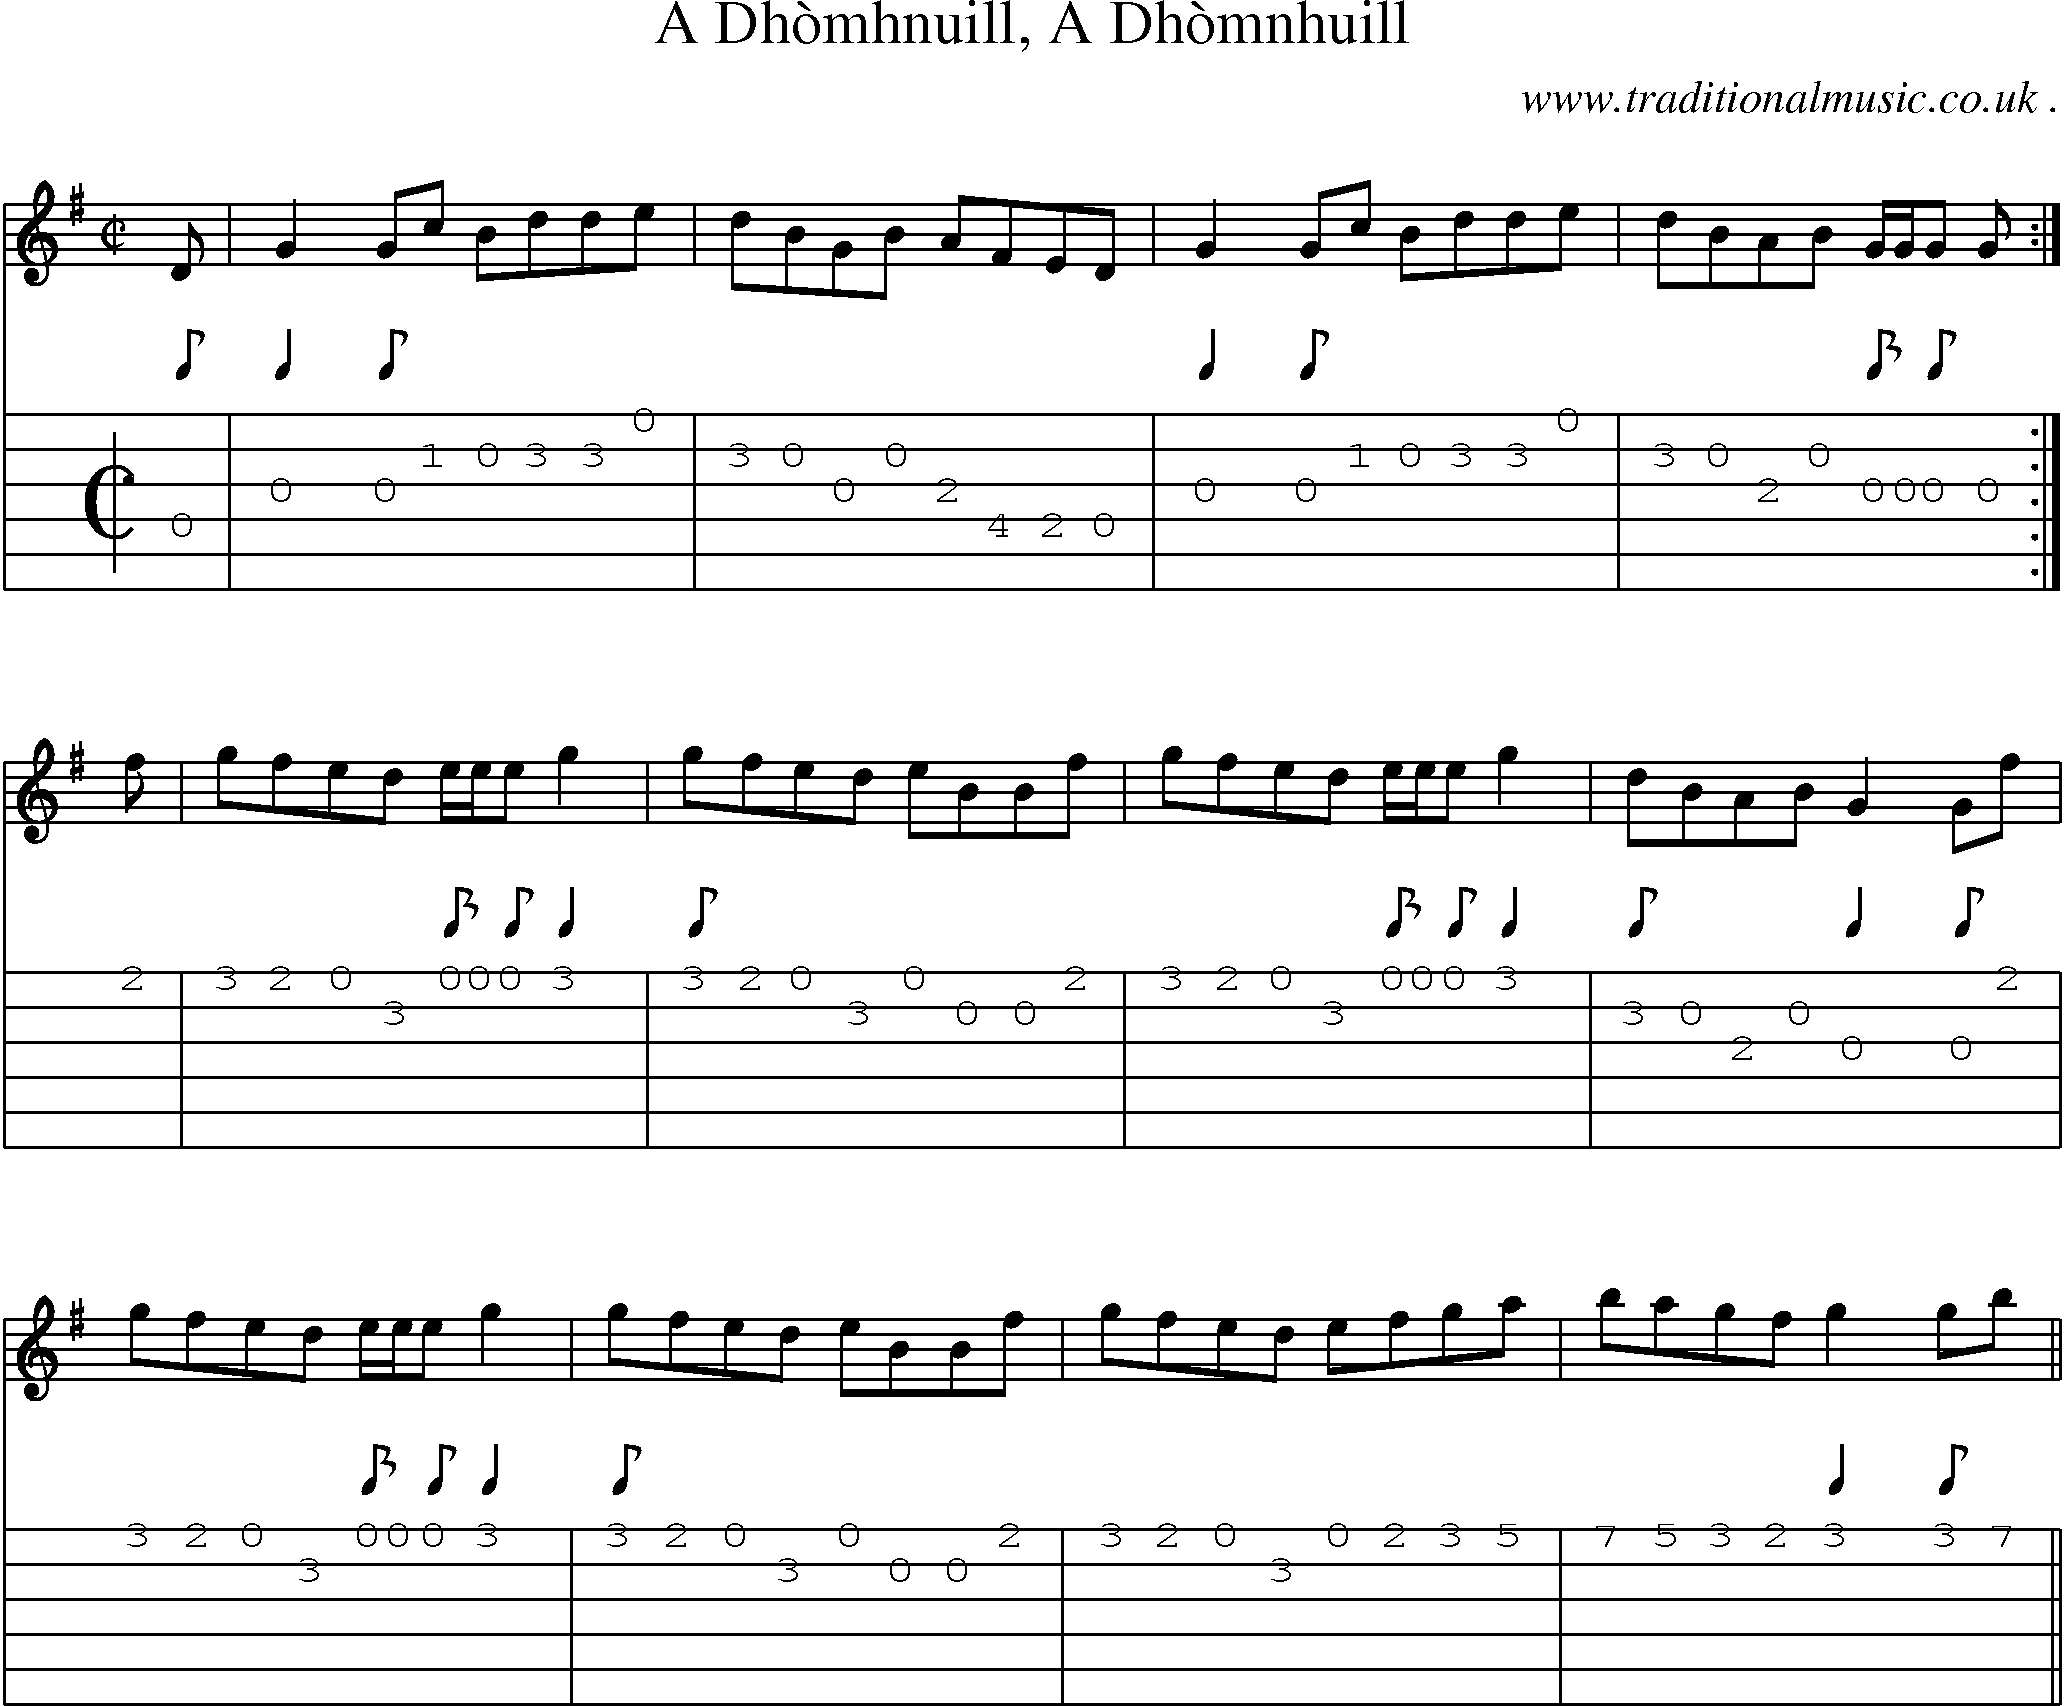 Sheet-music  score, Chords and Guitar Tabs for A Dhomhnuill A Dhomnhuill